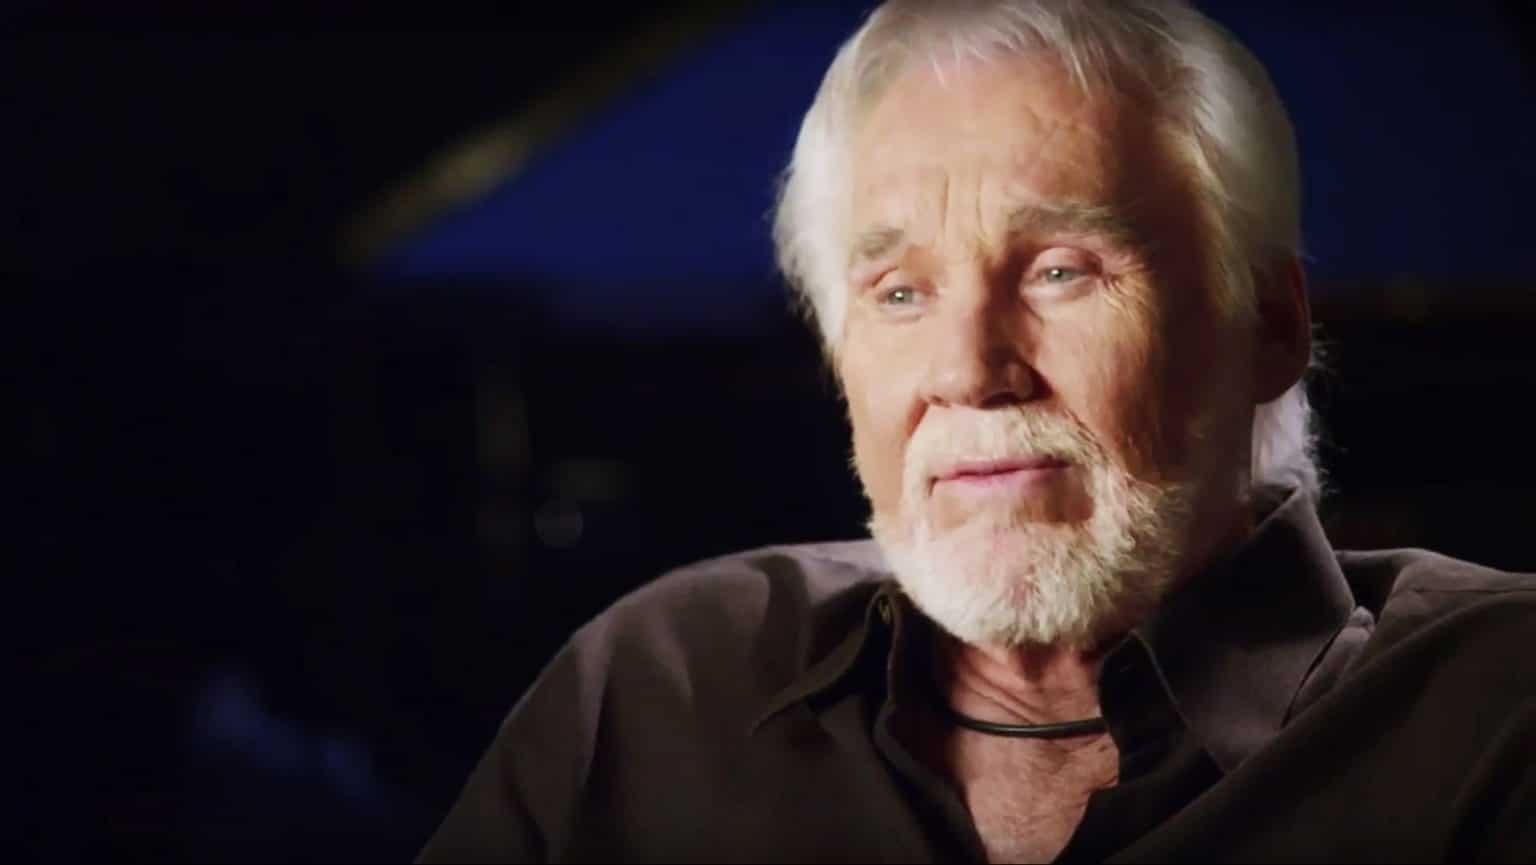 Nephew Of Kenny Rogers Opens Up About Growing Up With Music Legend